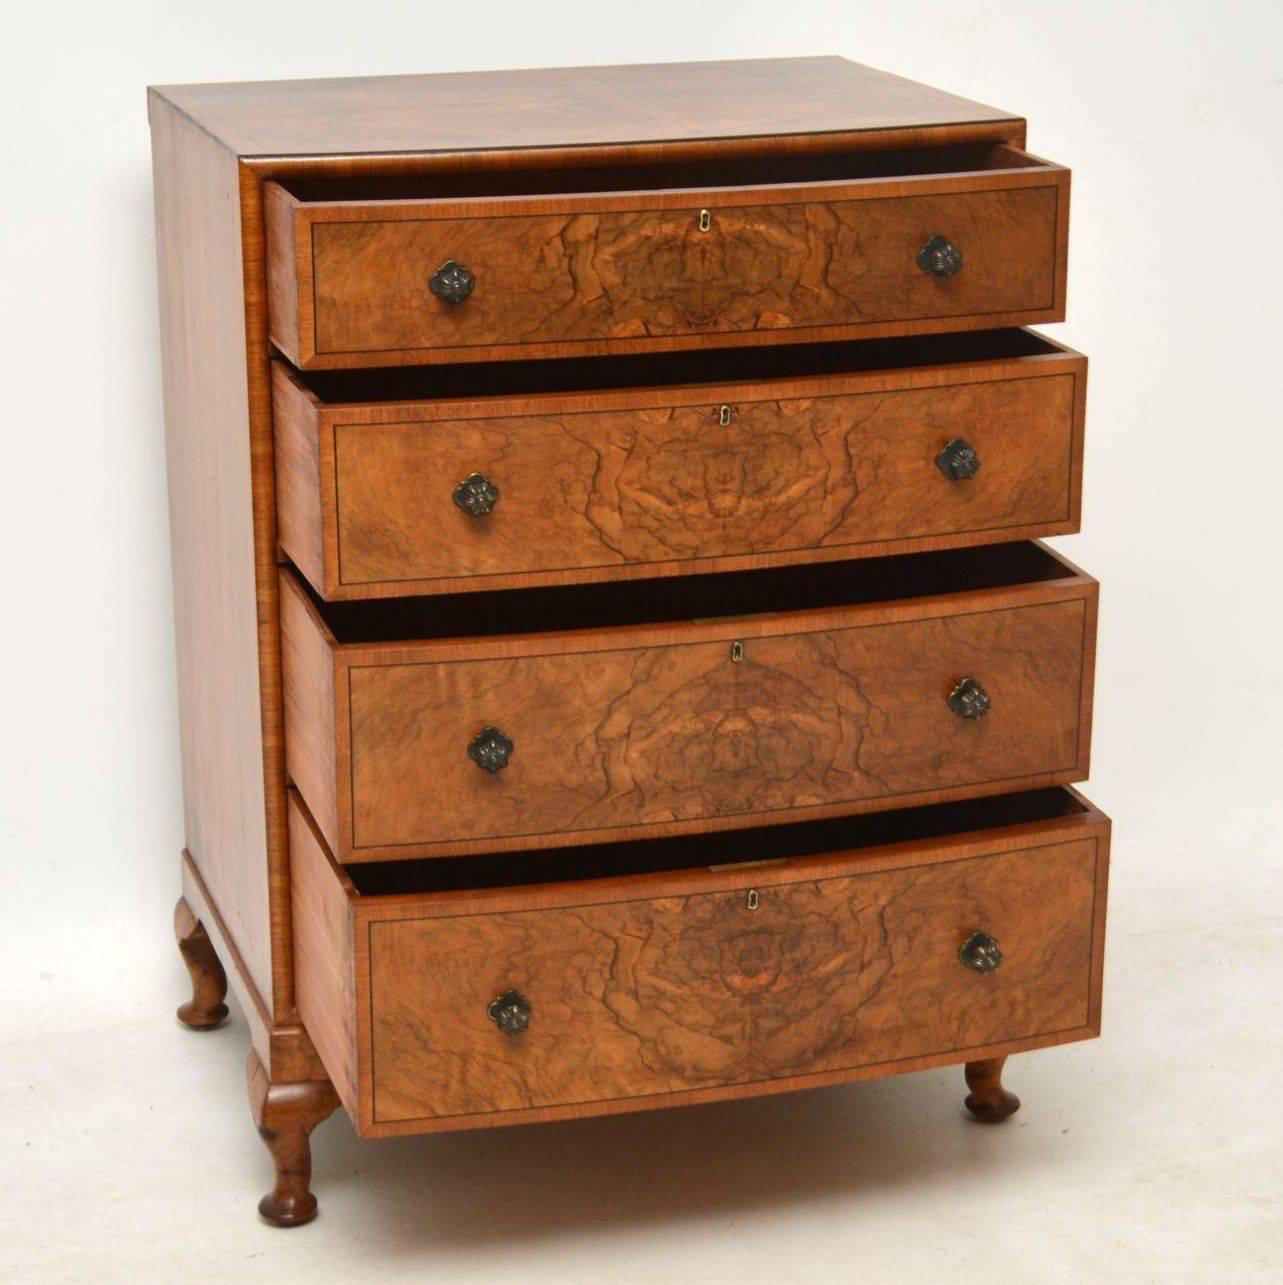 This antique walnut bow fronted chest of drawers is extremely fine quality and has some lovely features. The top and front is a well patterned burr walnut with fine ebony inlays and cross banding. The front edges of the chest are curved and it sits